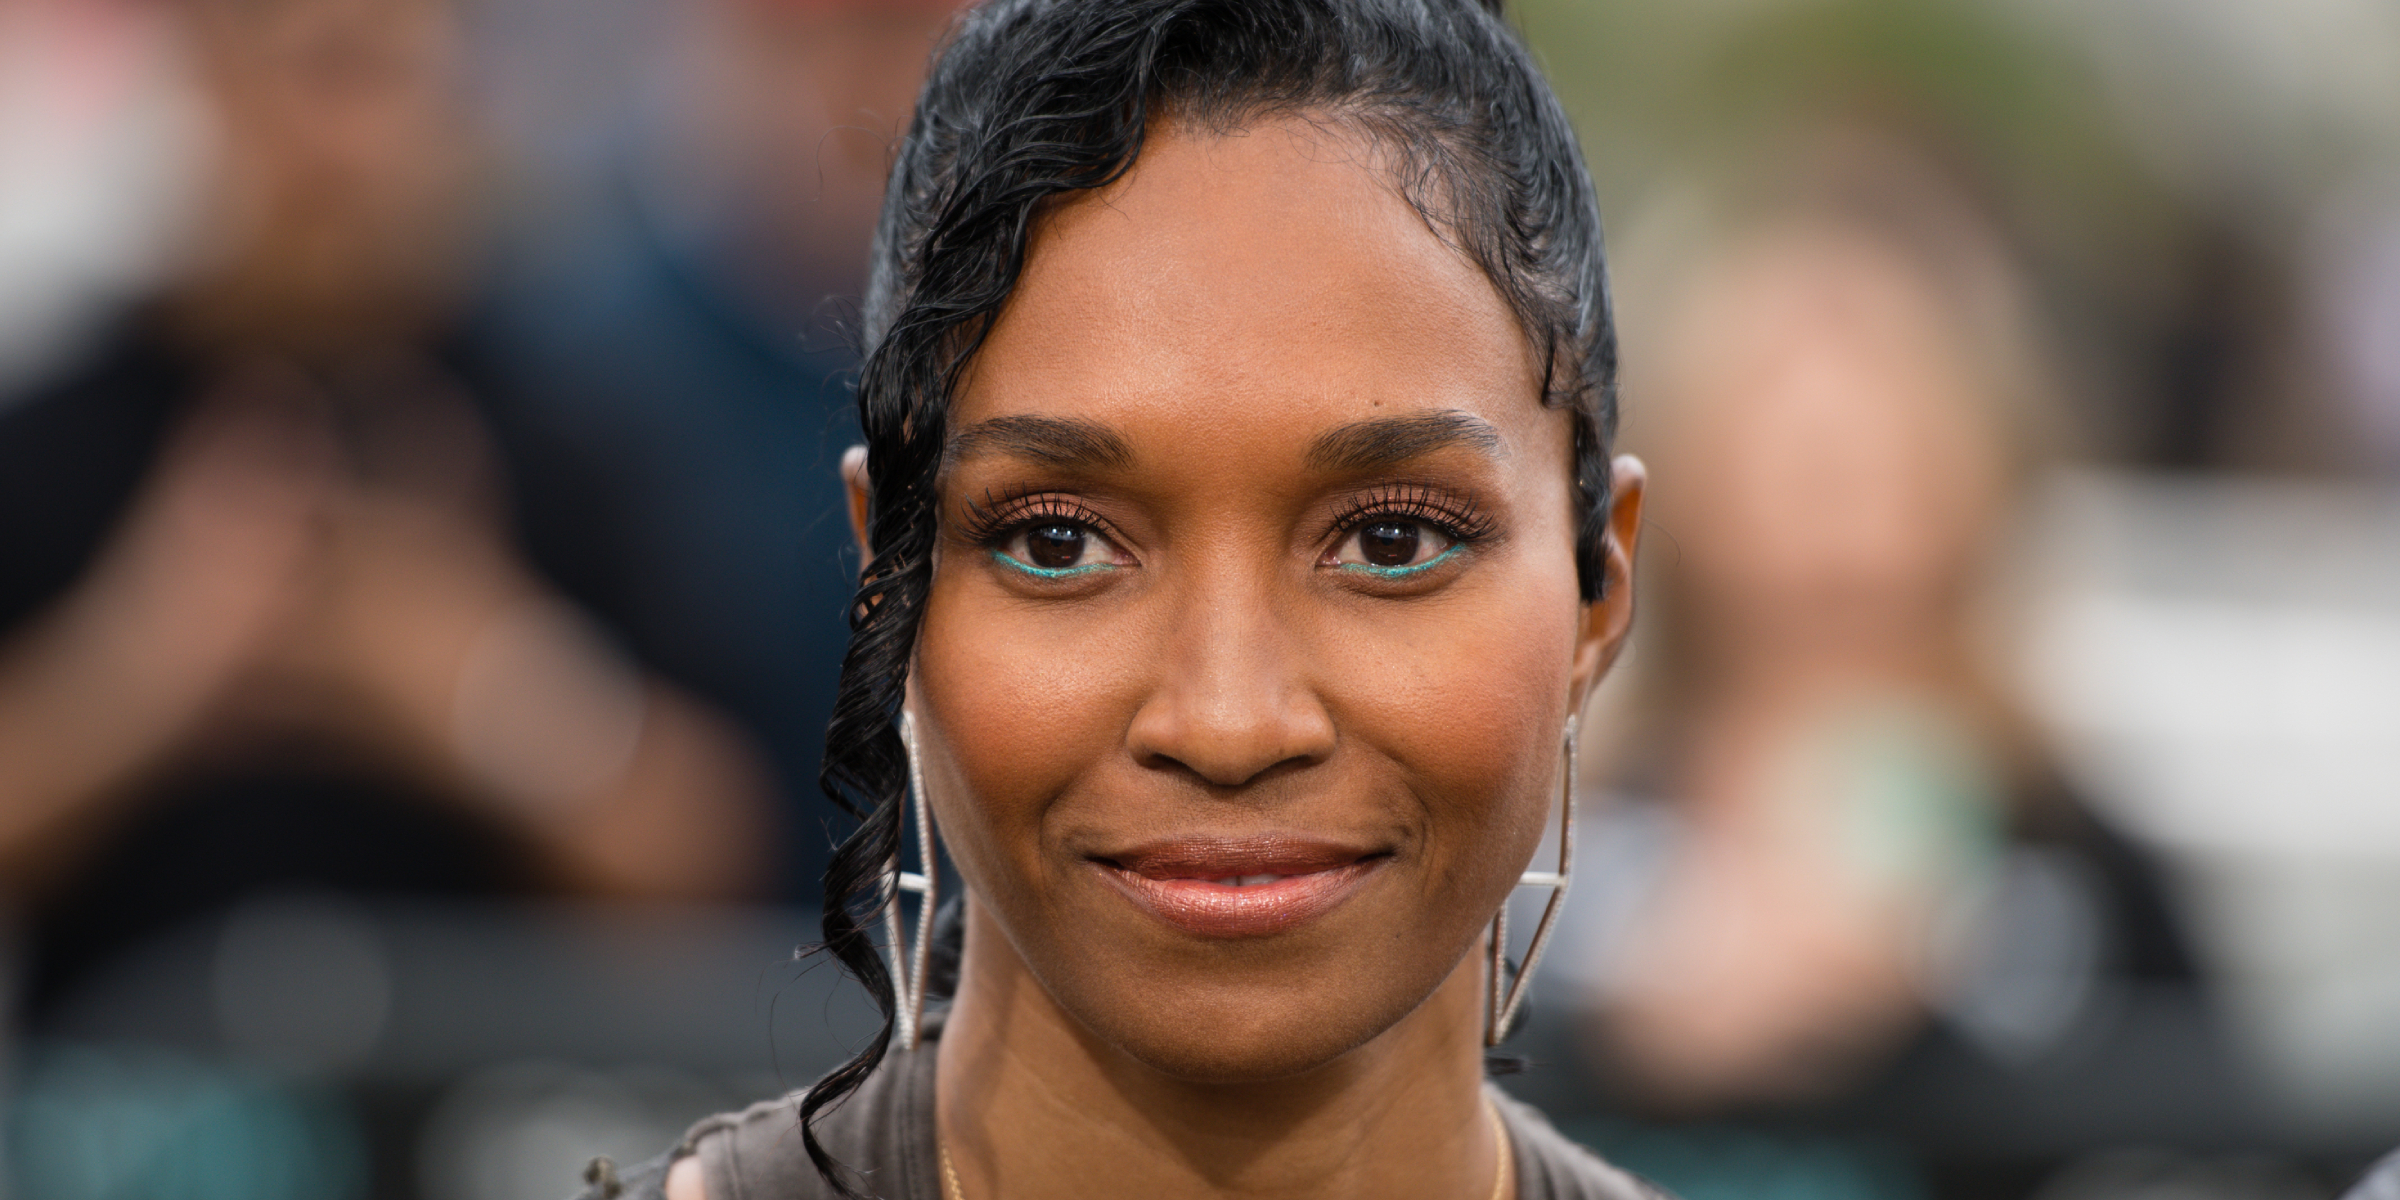 Chilli Thomas | Source: Getty Images